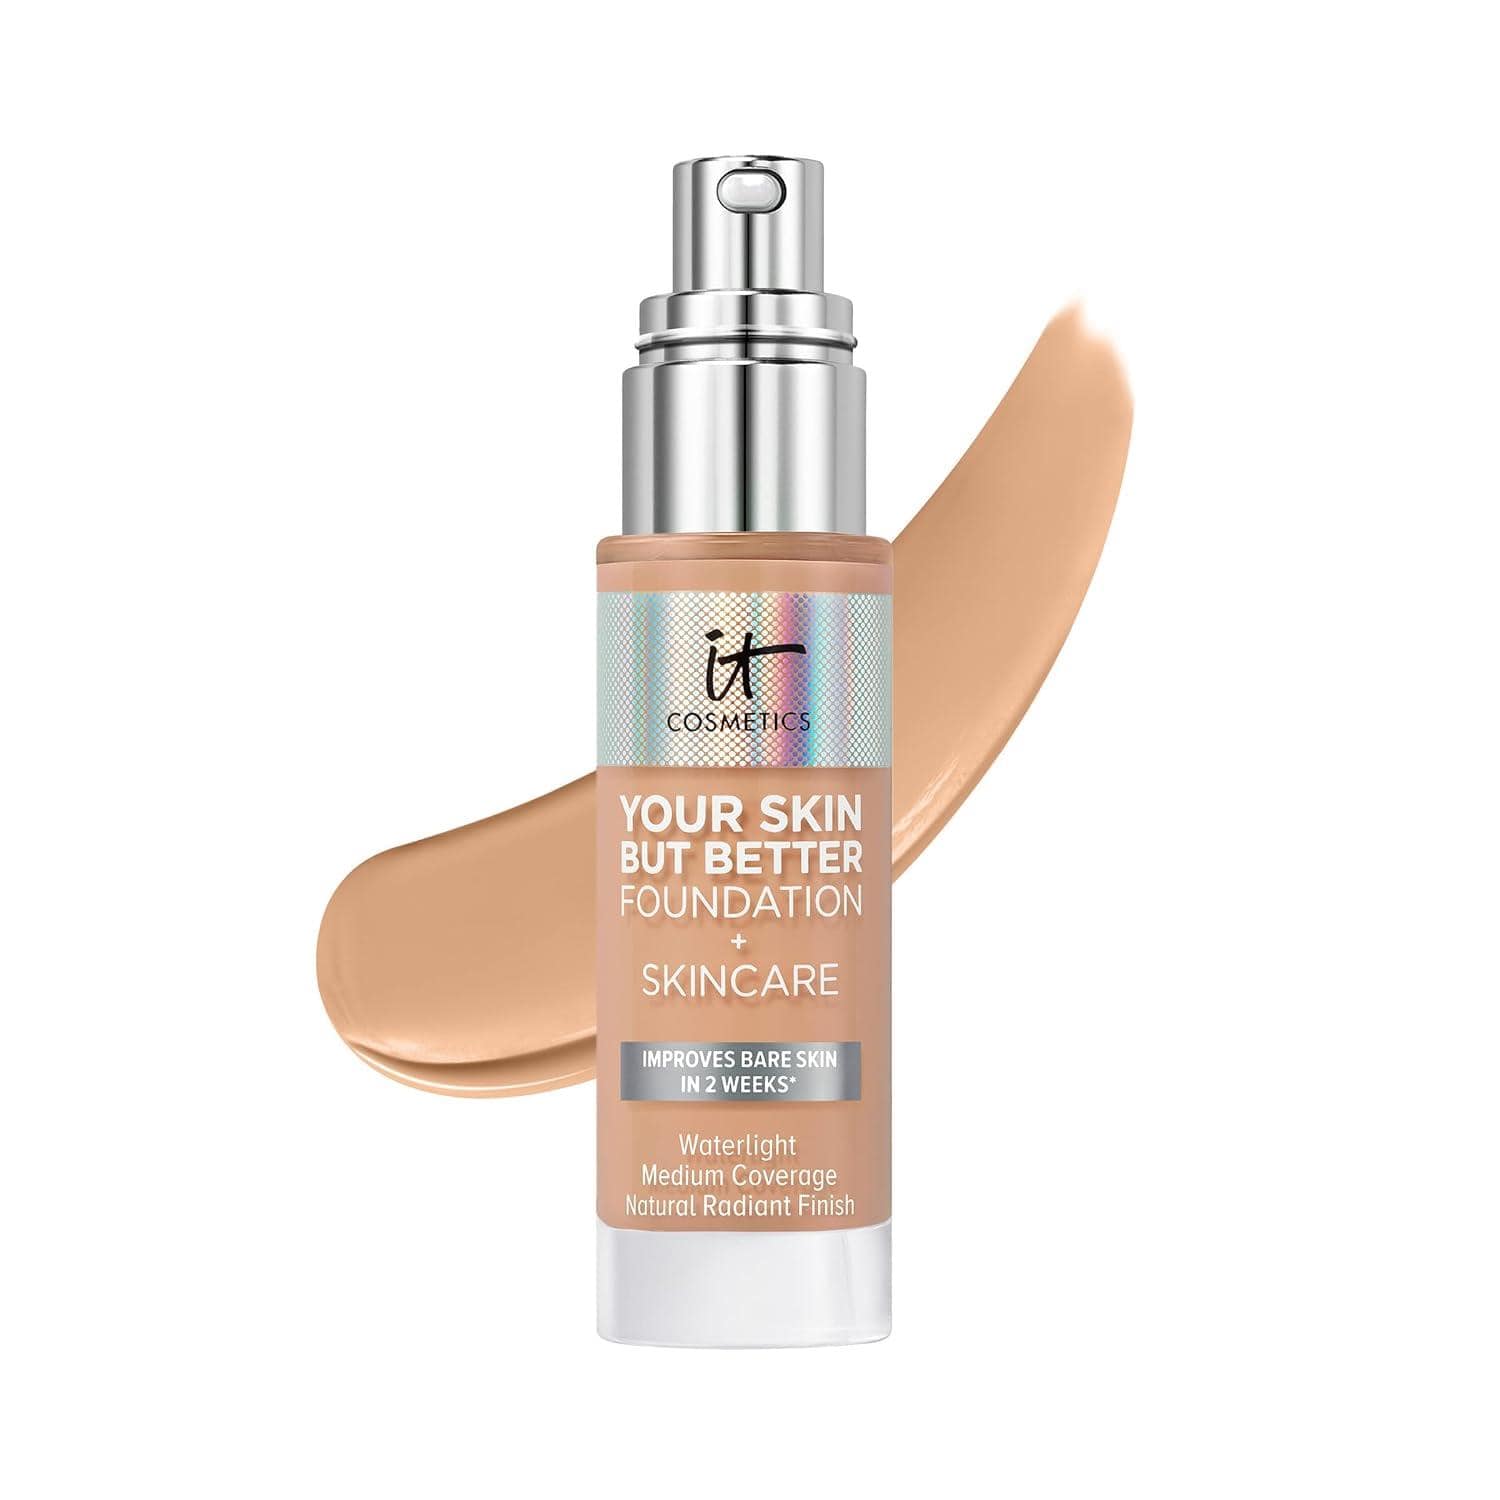 IT Cosmetics' foundation-serum hybrid: a hydrating radiance boost with anti-aging benefits, seamlessly smoothing fine lines for a naturally glowing, skin-like finish.